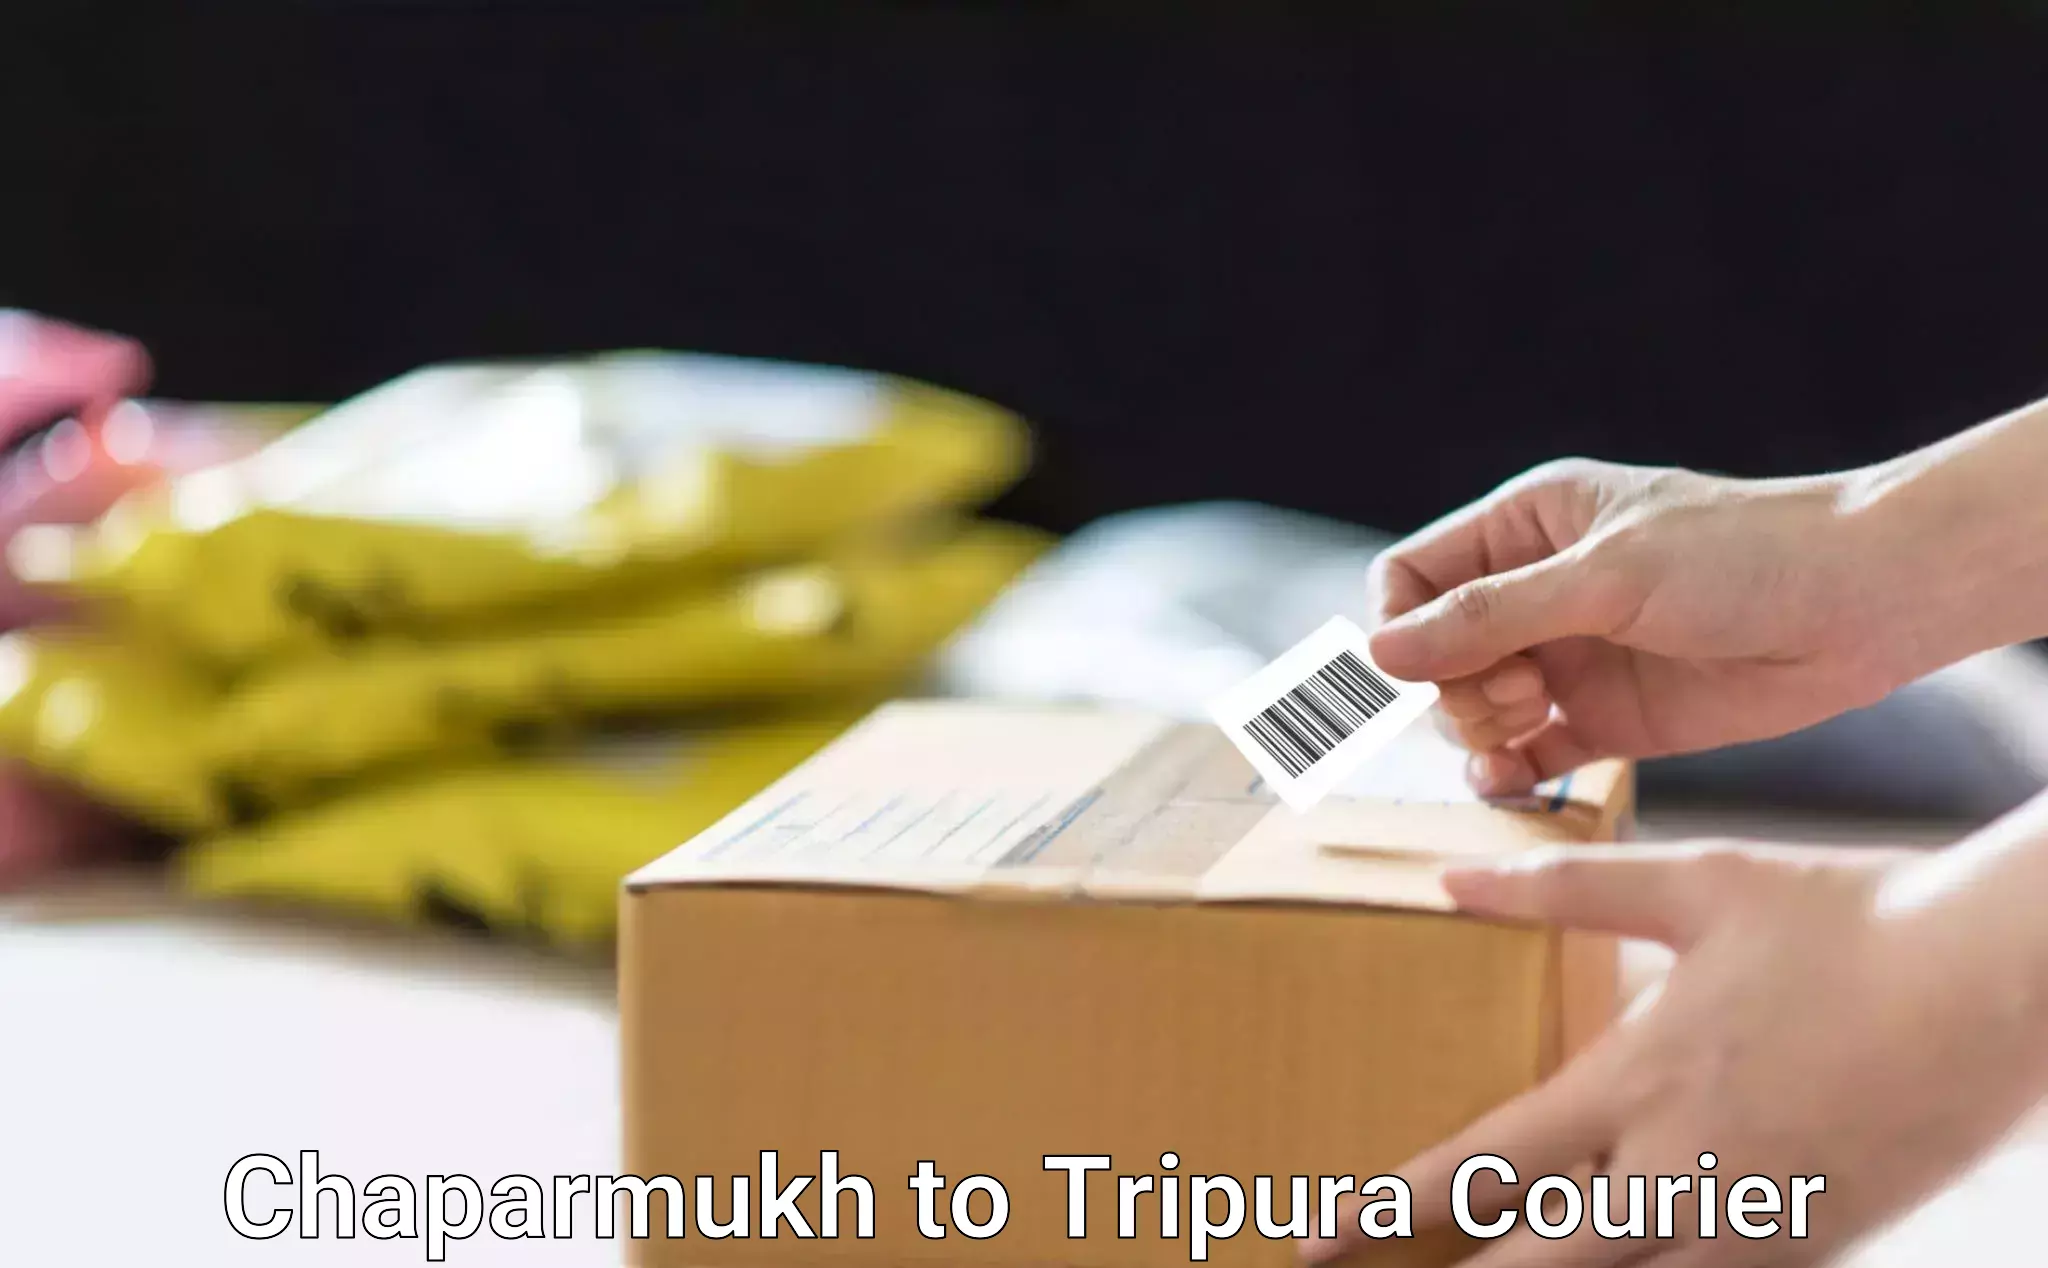 Large-scale shipping solutions Chaparmukh to North Tripura